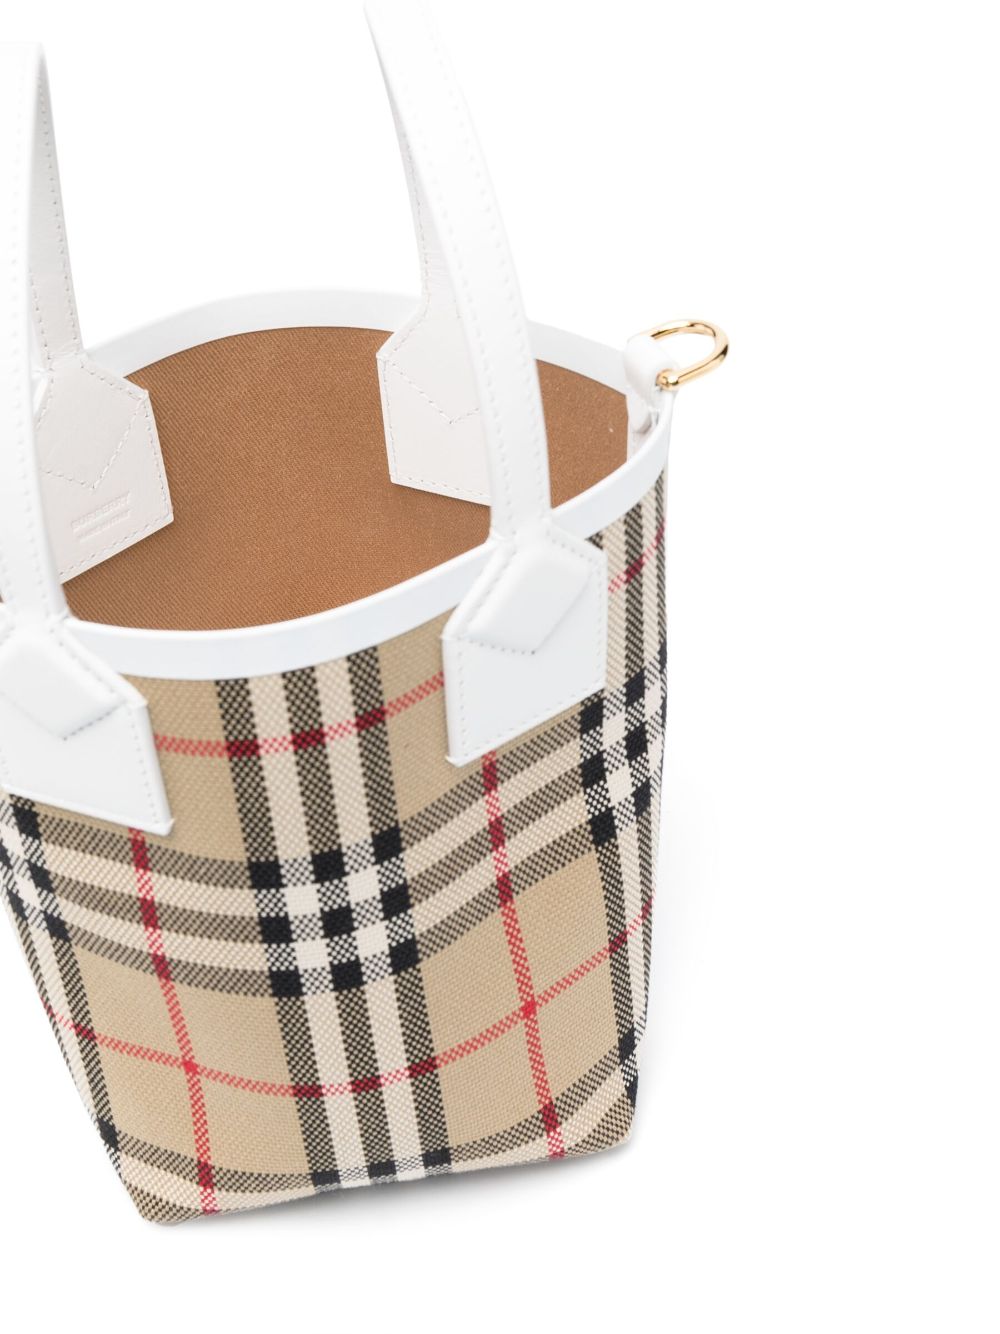 BURBERRY Mini Vintage Check Leather Bucket Tote in Tan for Women